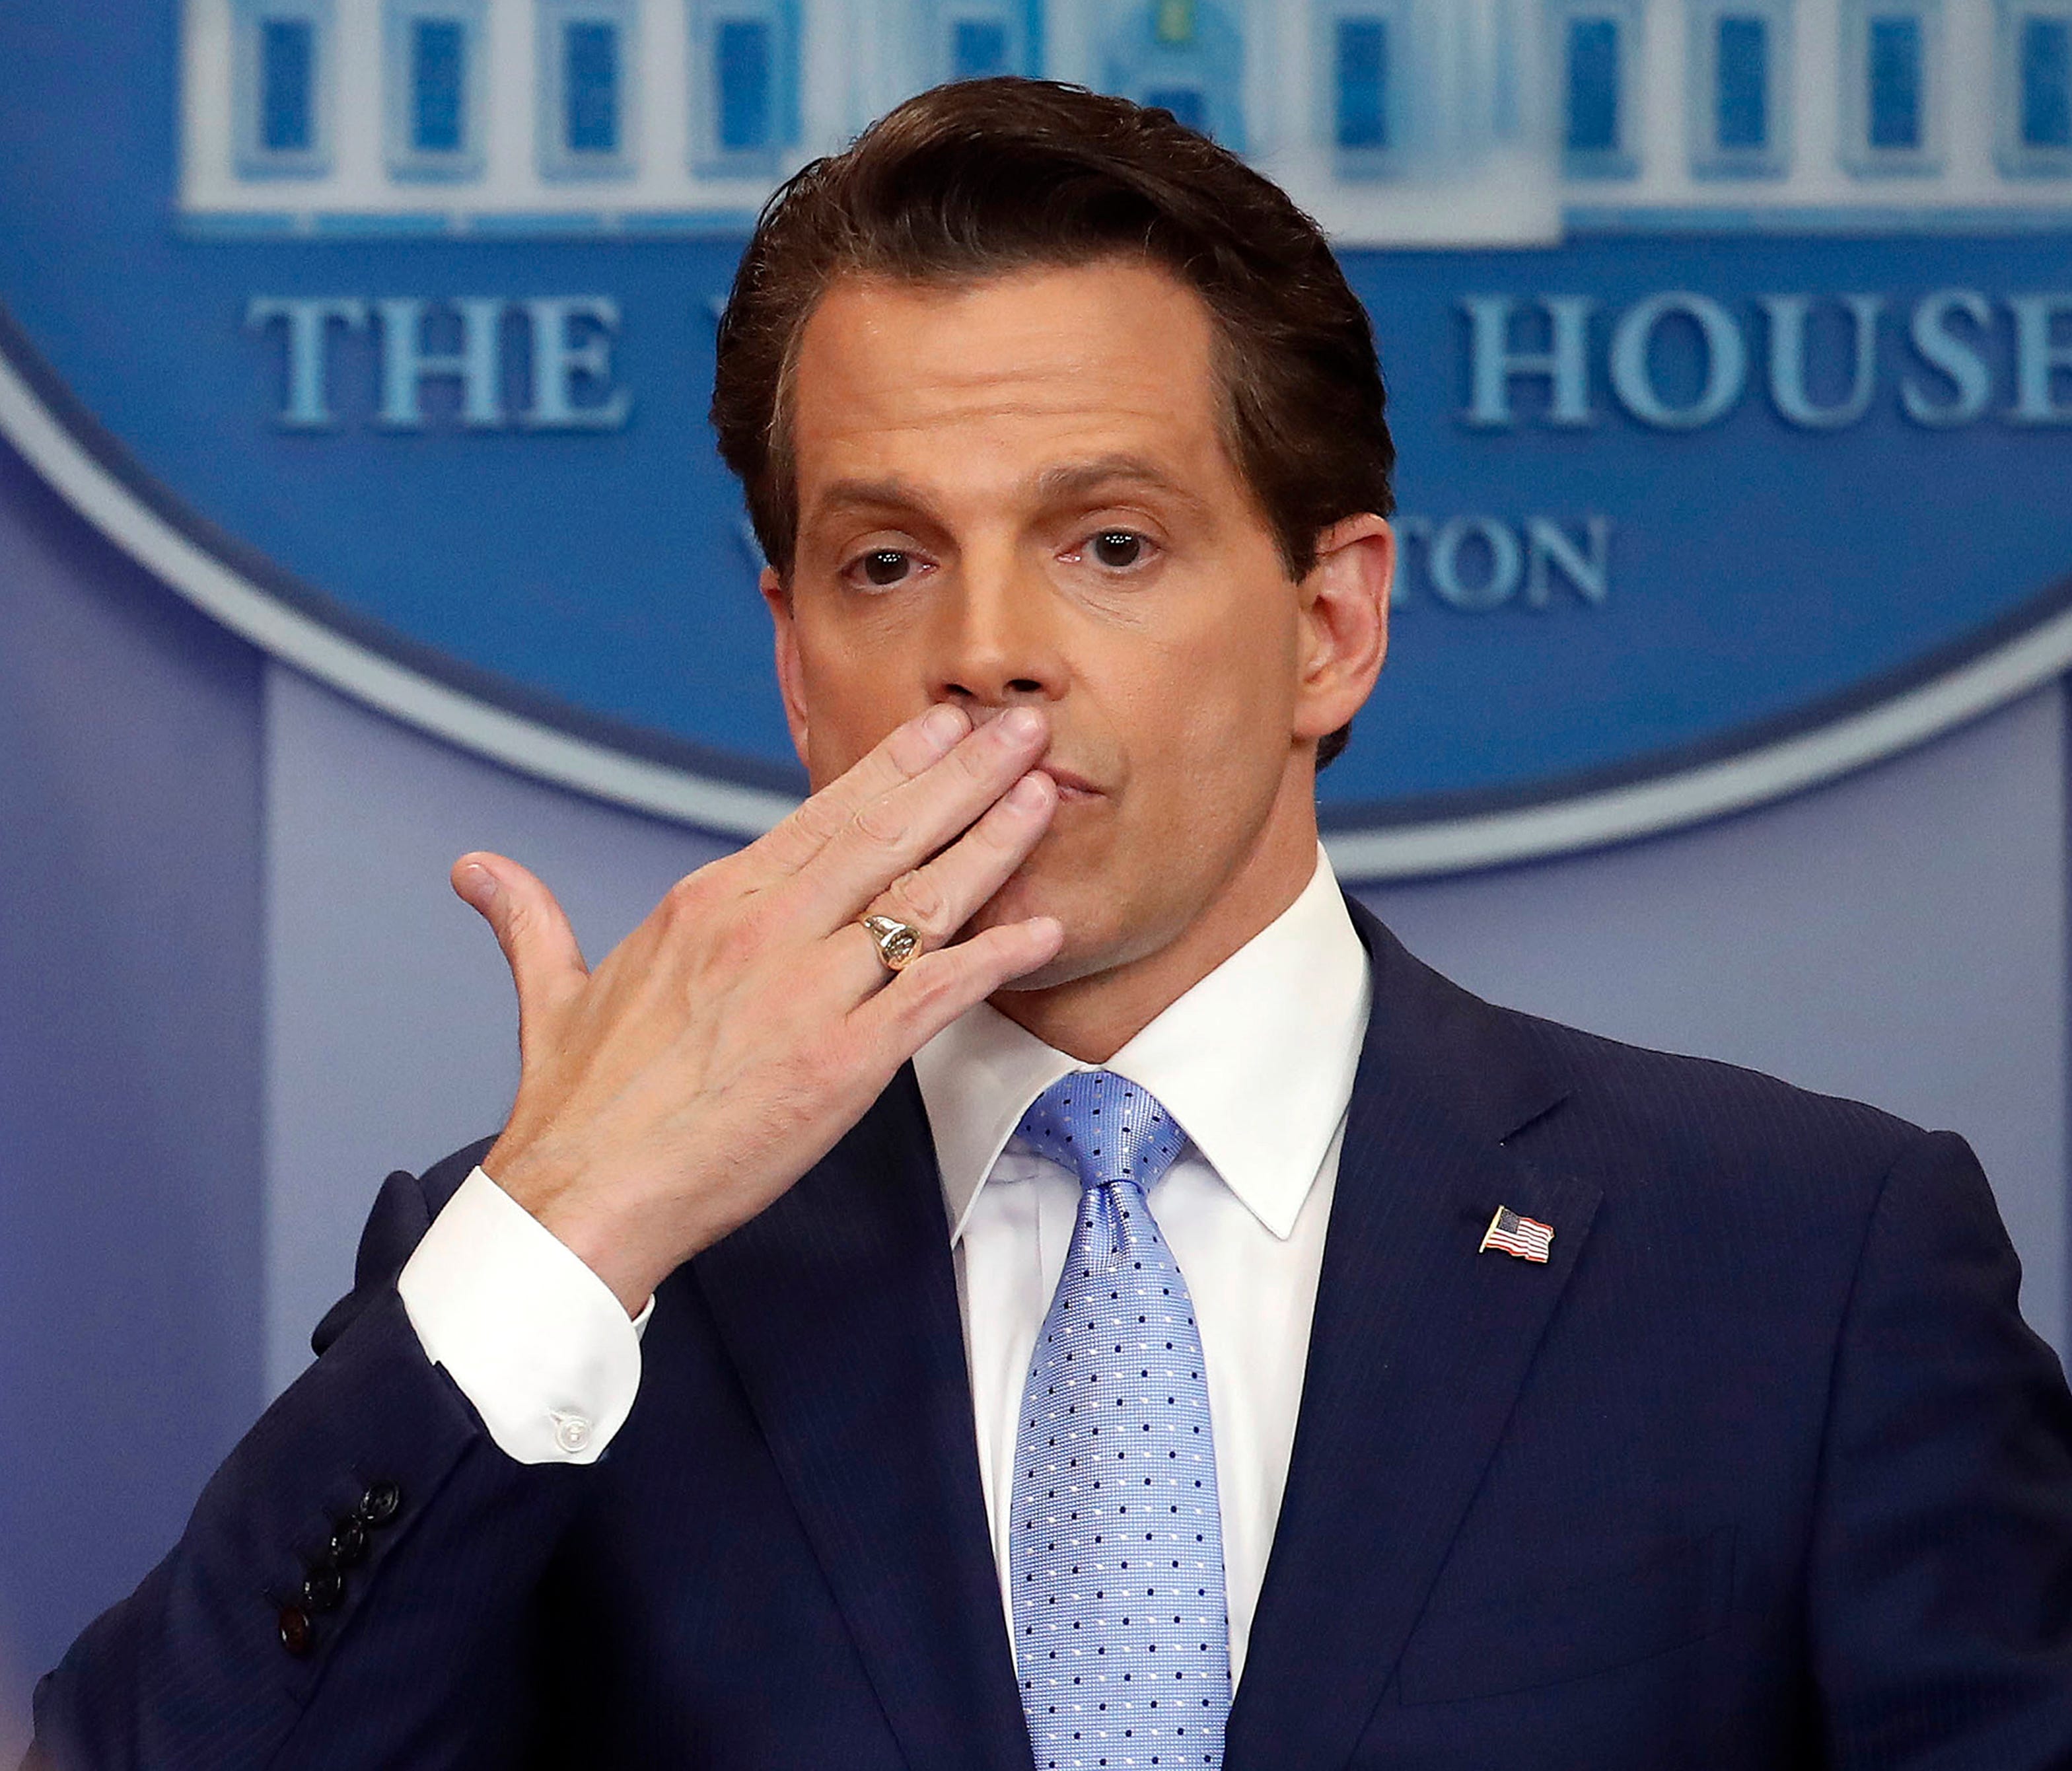 In this July 21, 2017 photo, incoming White House communications director Anthony Scaramucci, right, blowing a kiss after answering questions during the press briefing in the Brady Press Briefing room of the White House in Washington.